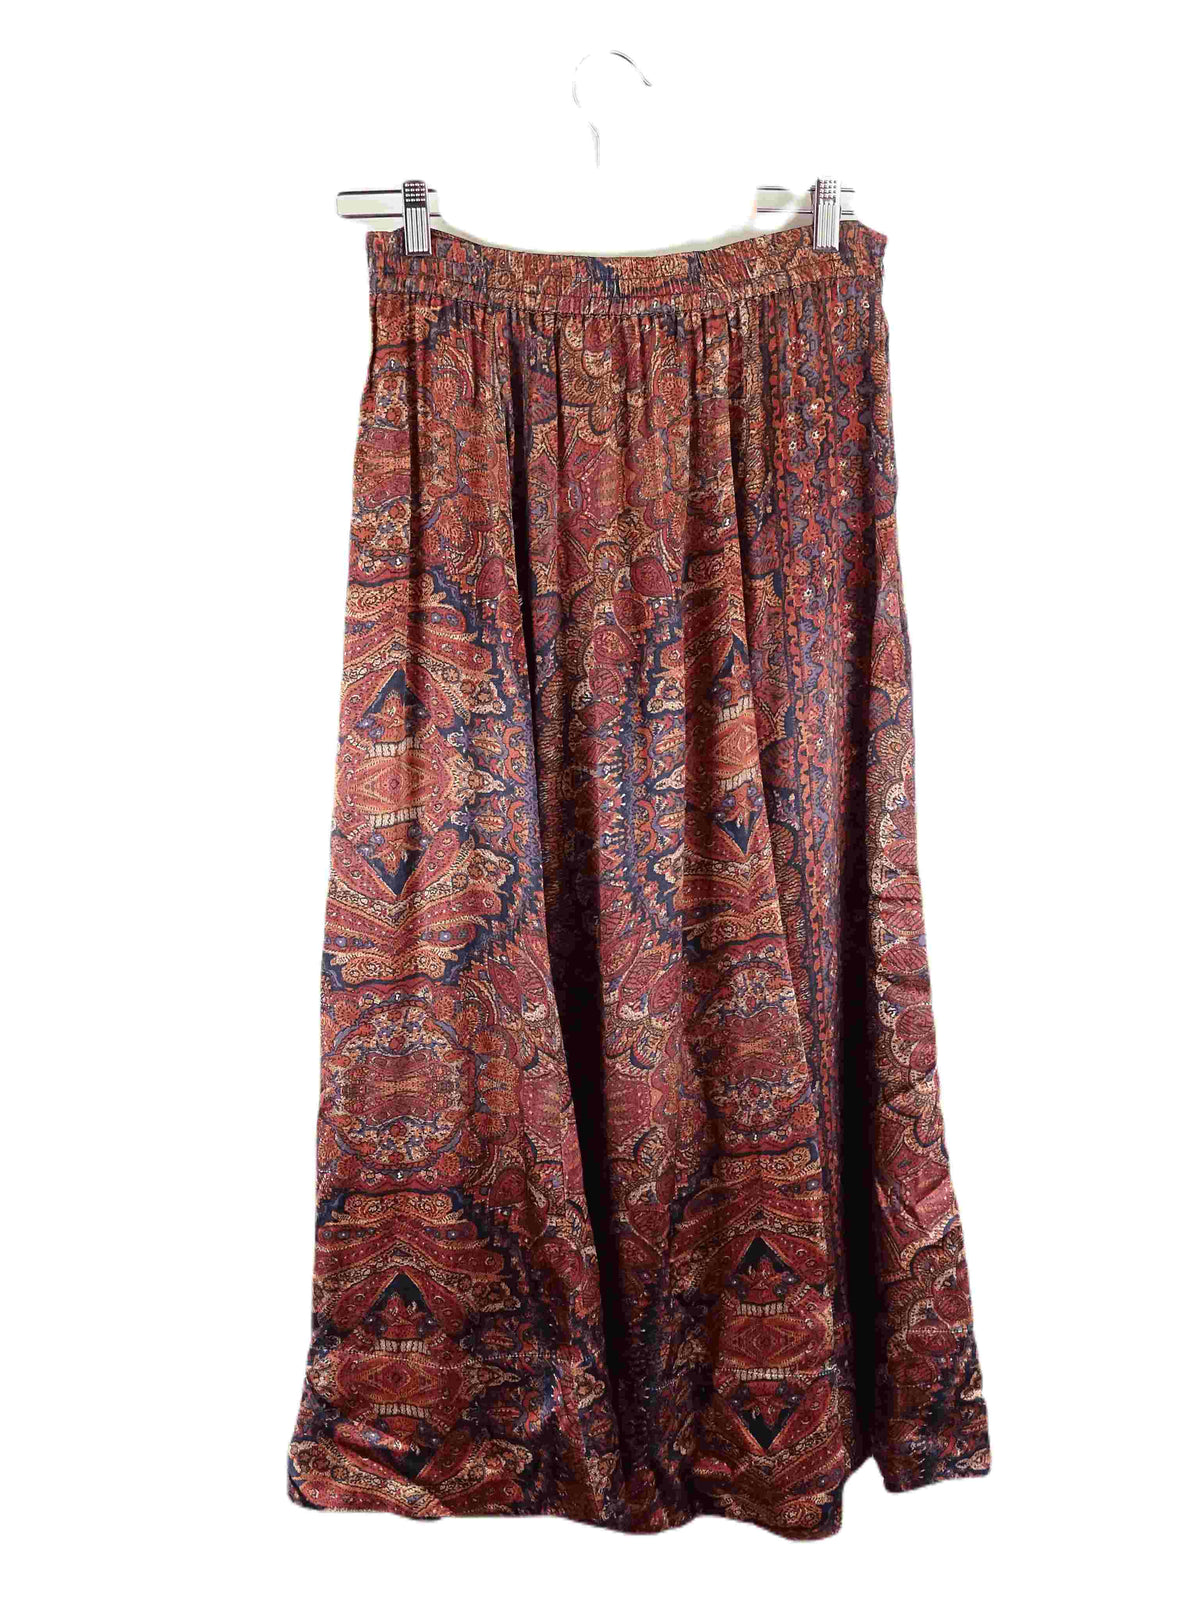 By Timo Red Multi Print Maxi Skirt S